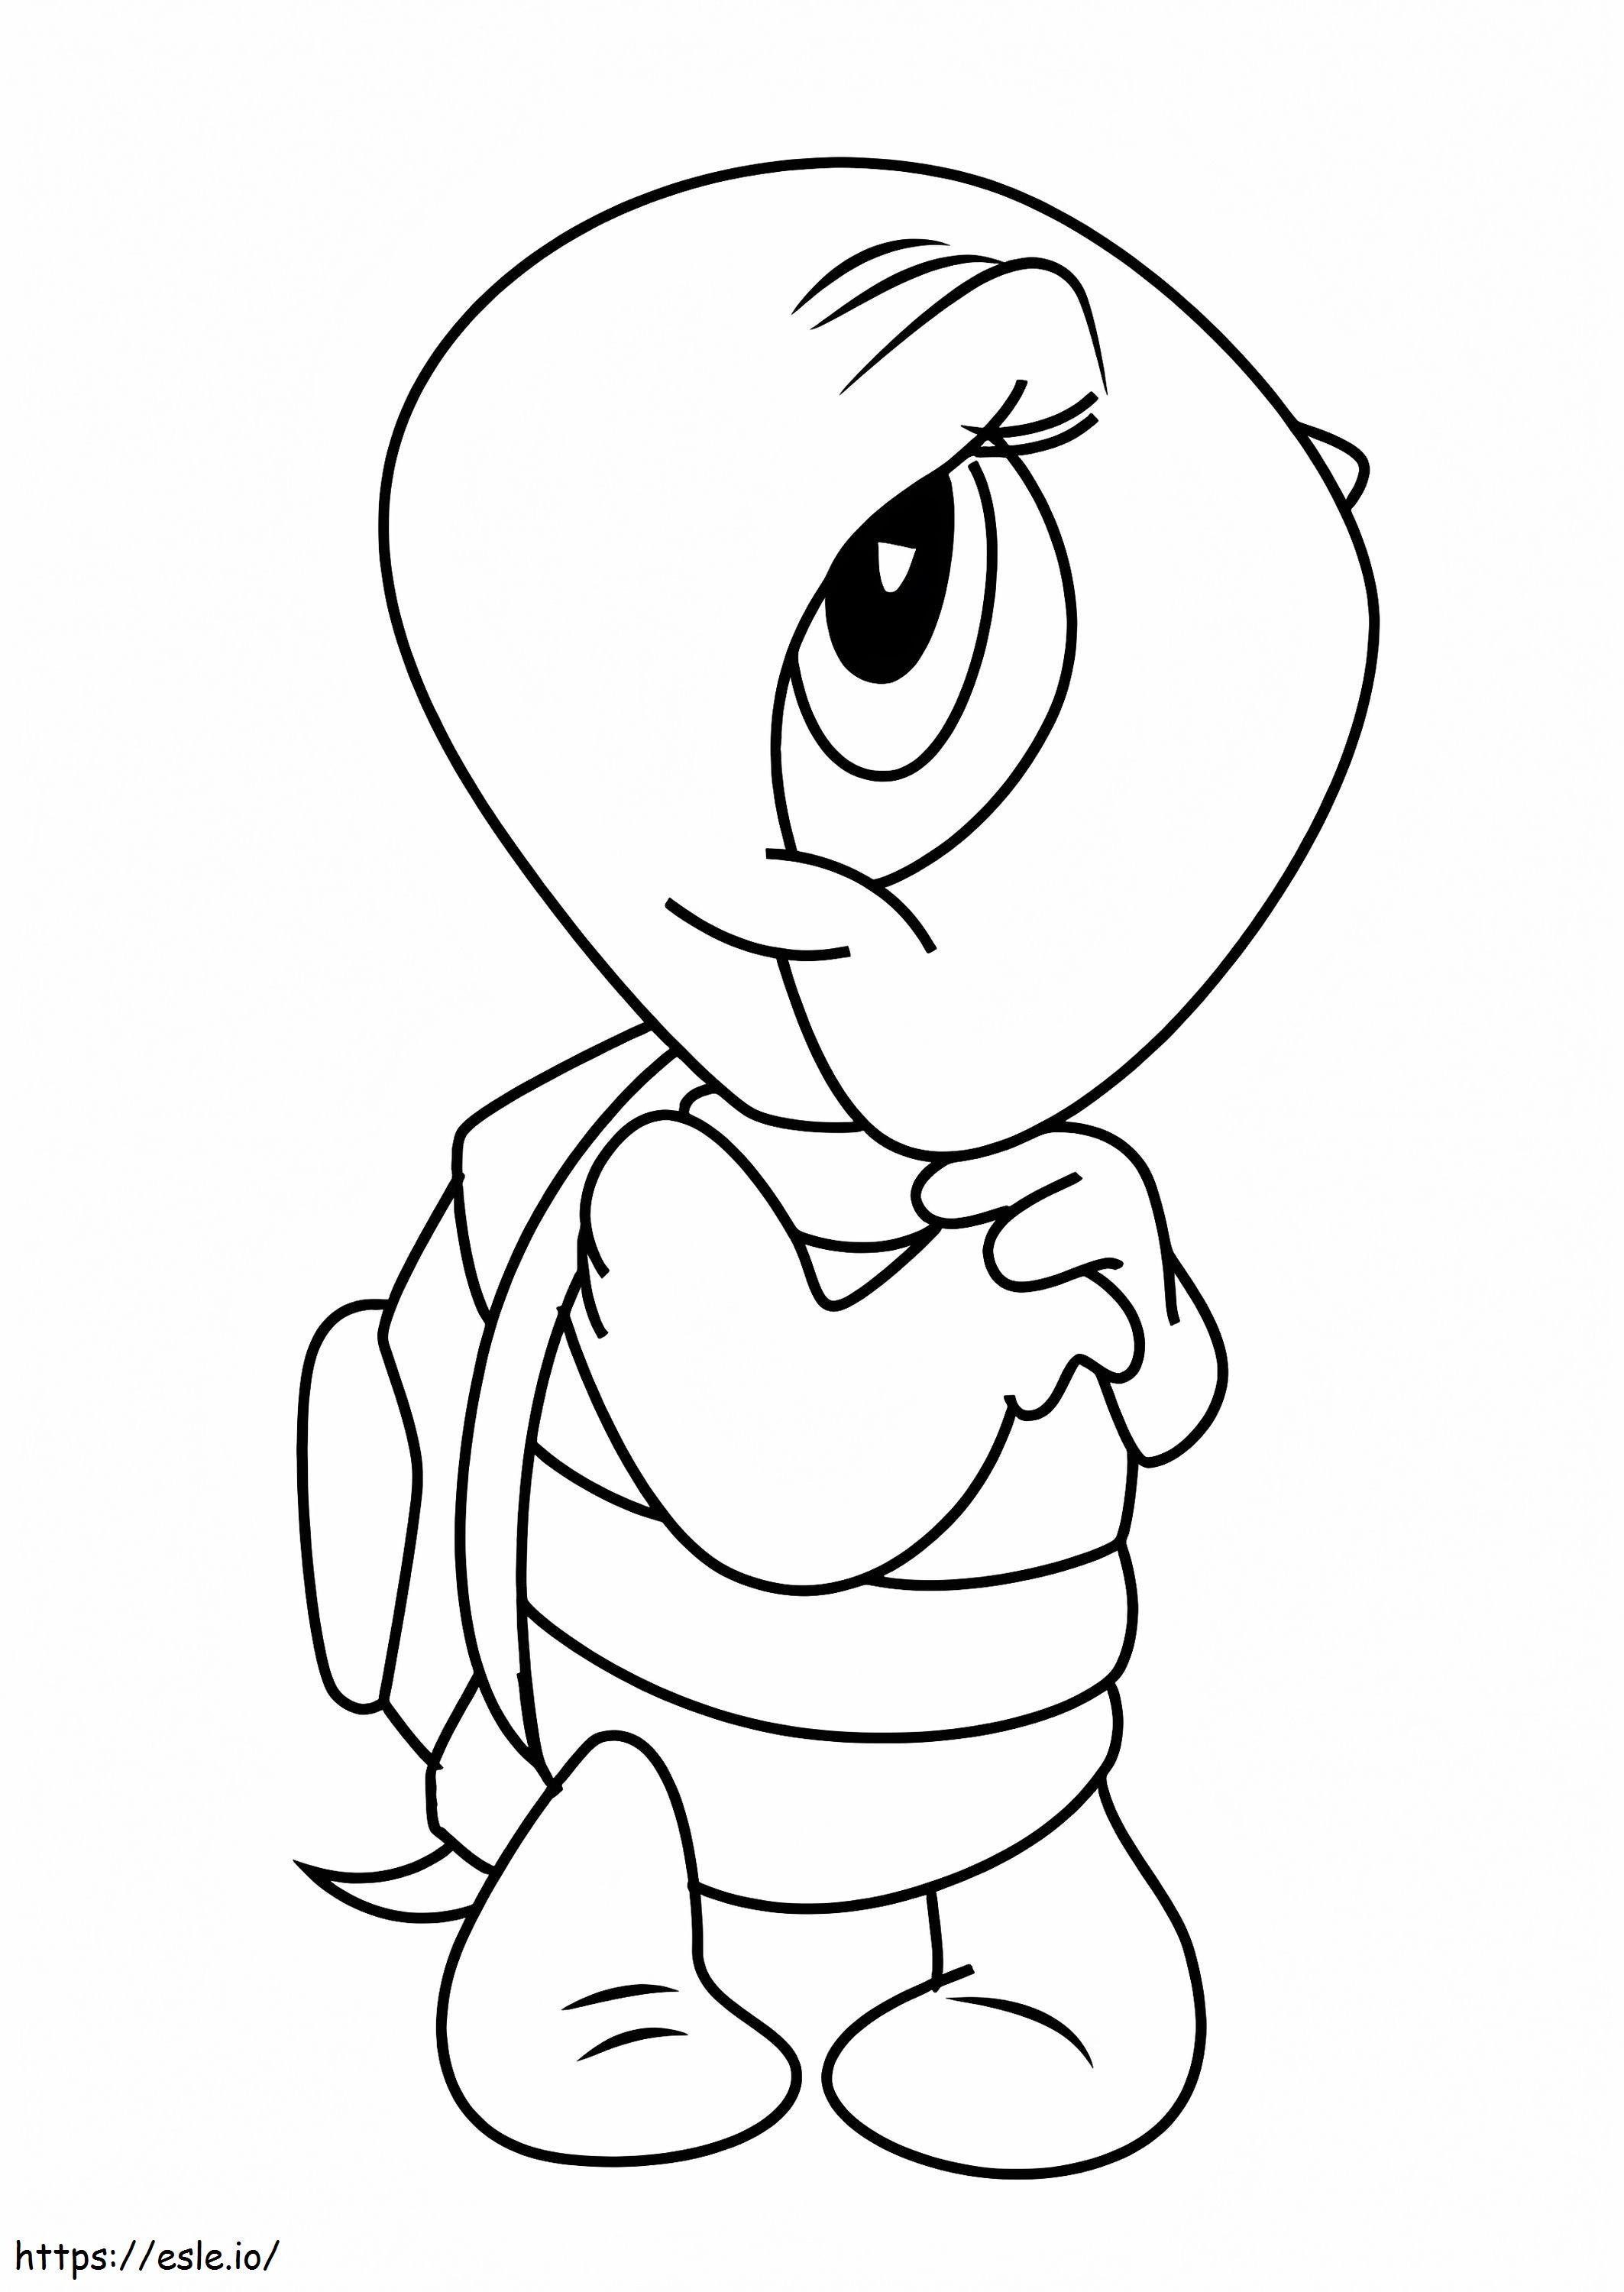 Tyrone The Turtle coloring page